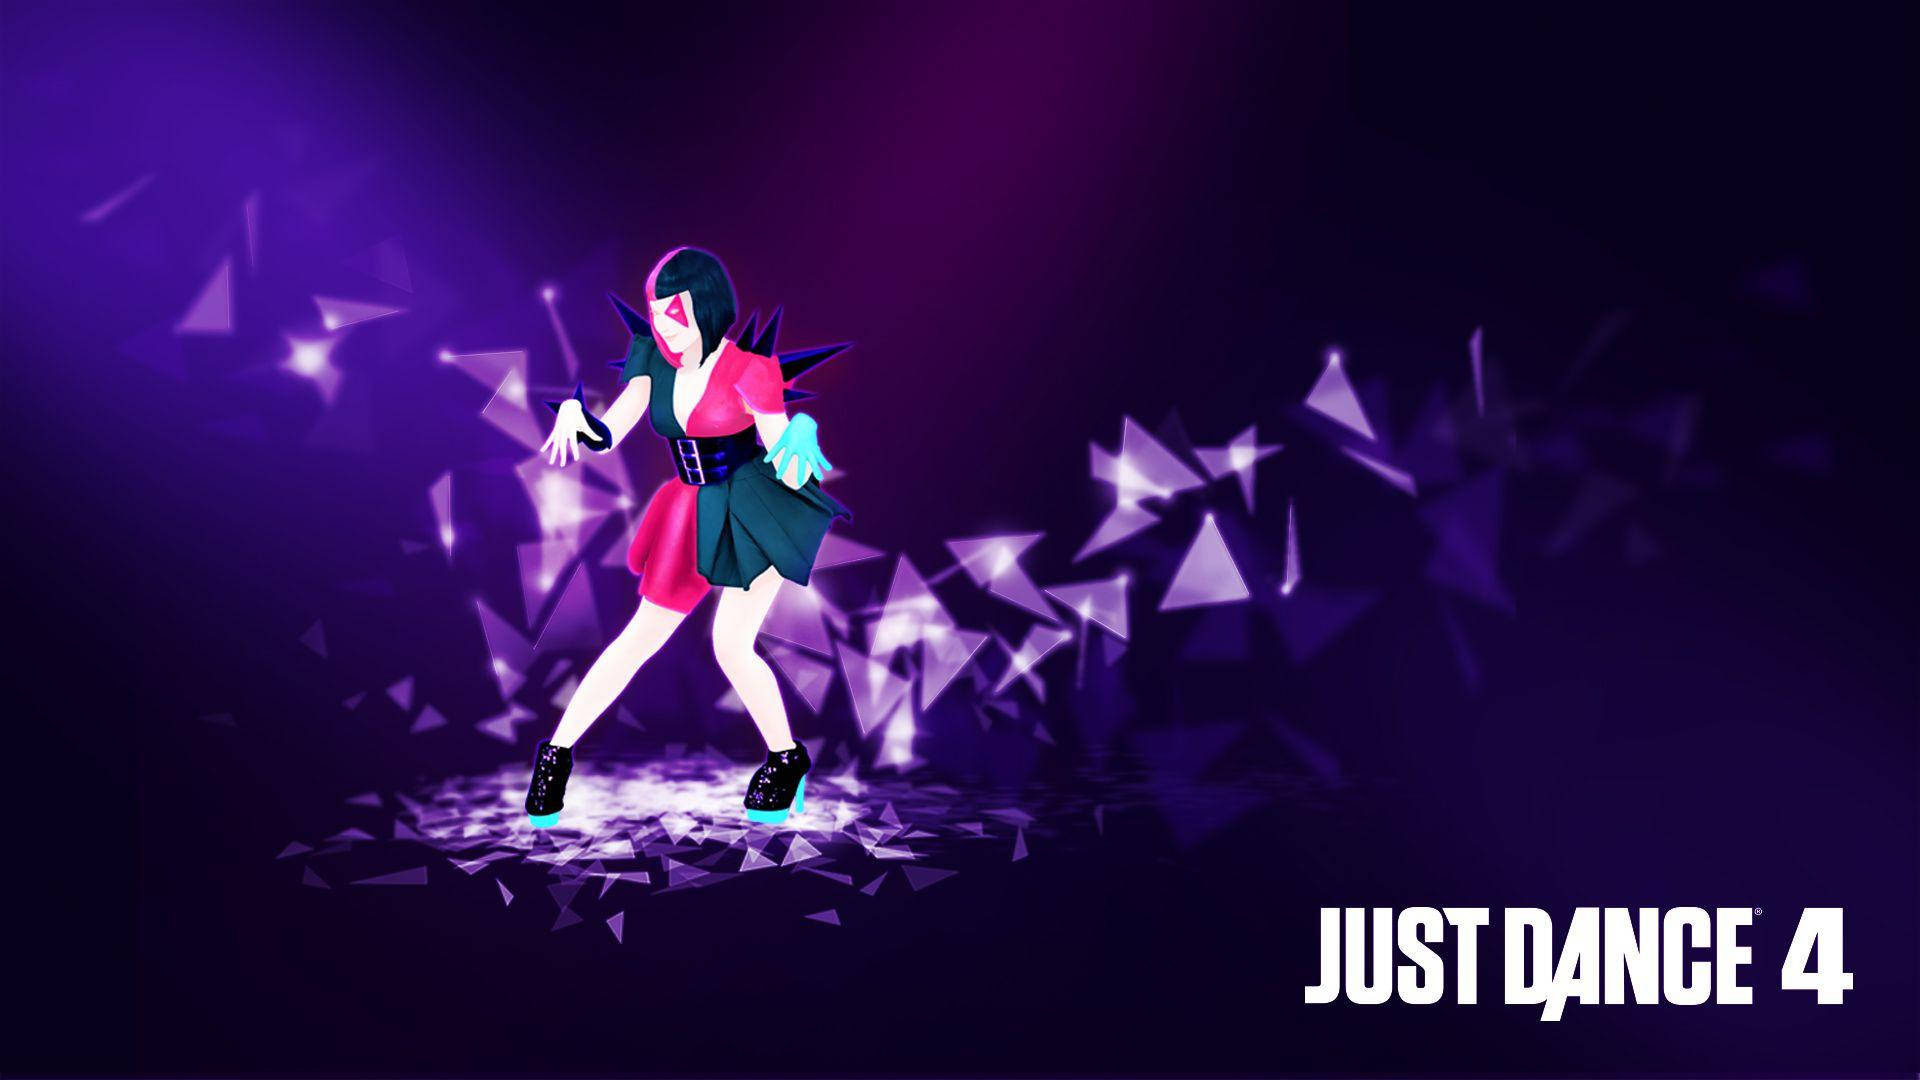 Just Dance 4 Dancer With Floating Triangles